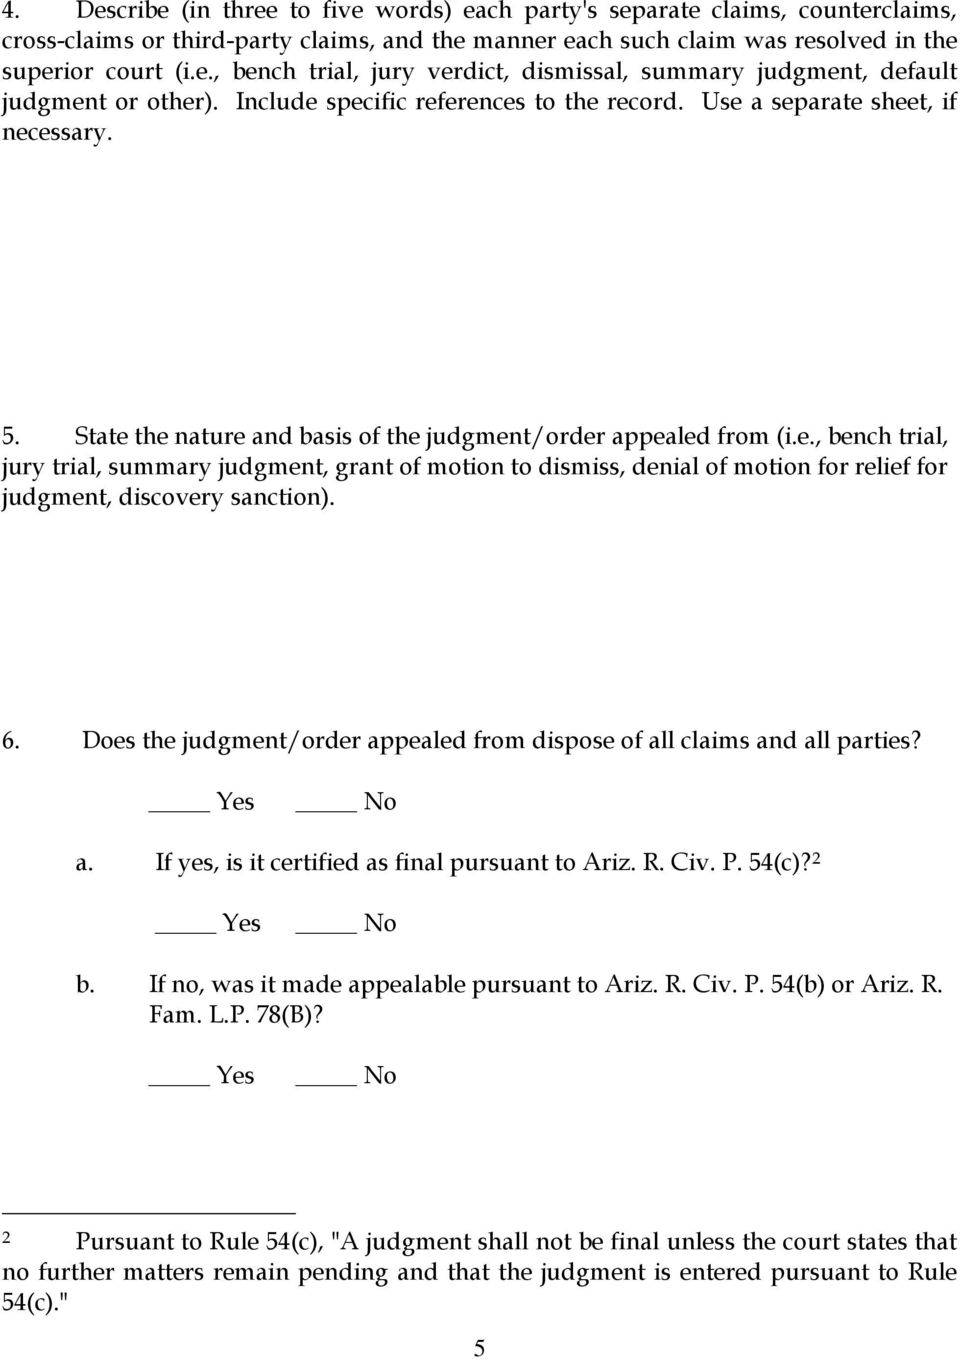 6. Does the judgment/order appealed from dispose of all claims and all parties? a. If yes, is it certified as final pursuant to Ariz. R. Civ. P. 54(c)? 2 b.